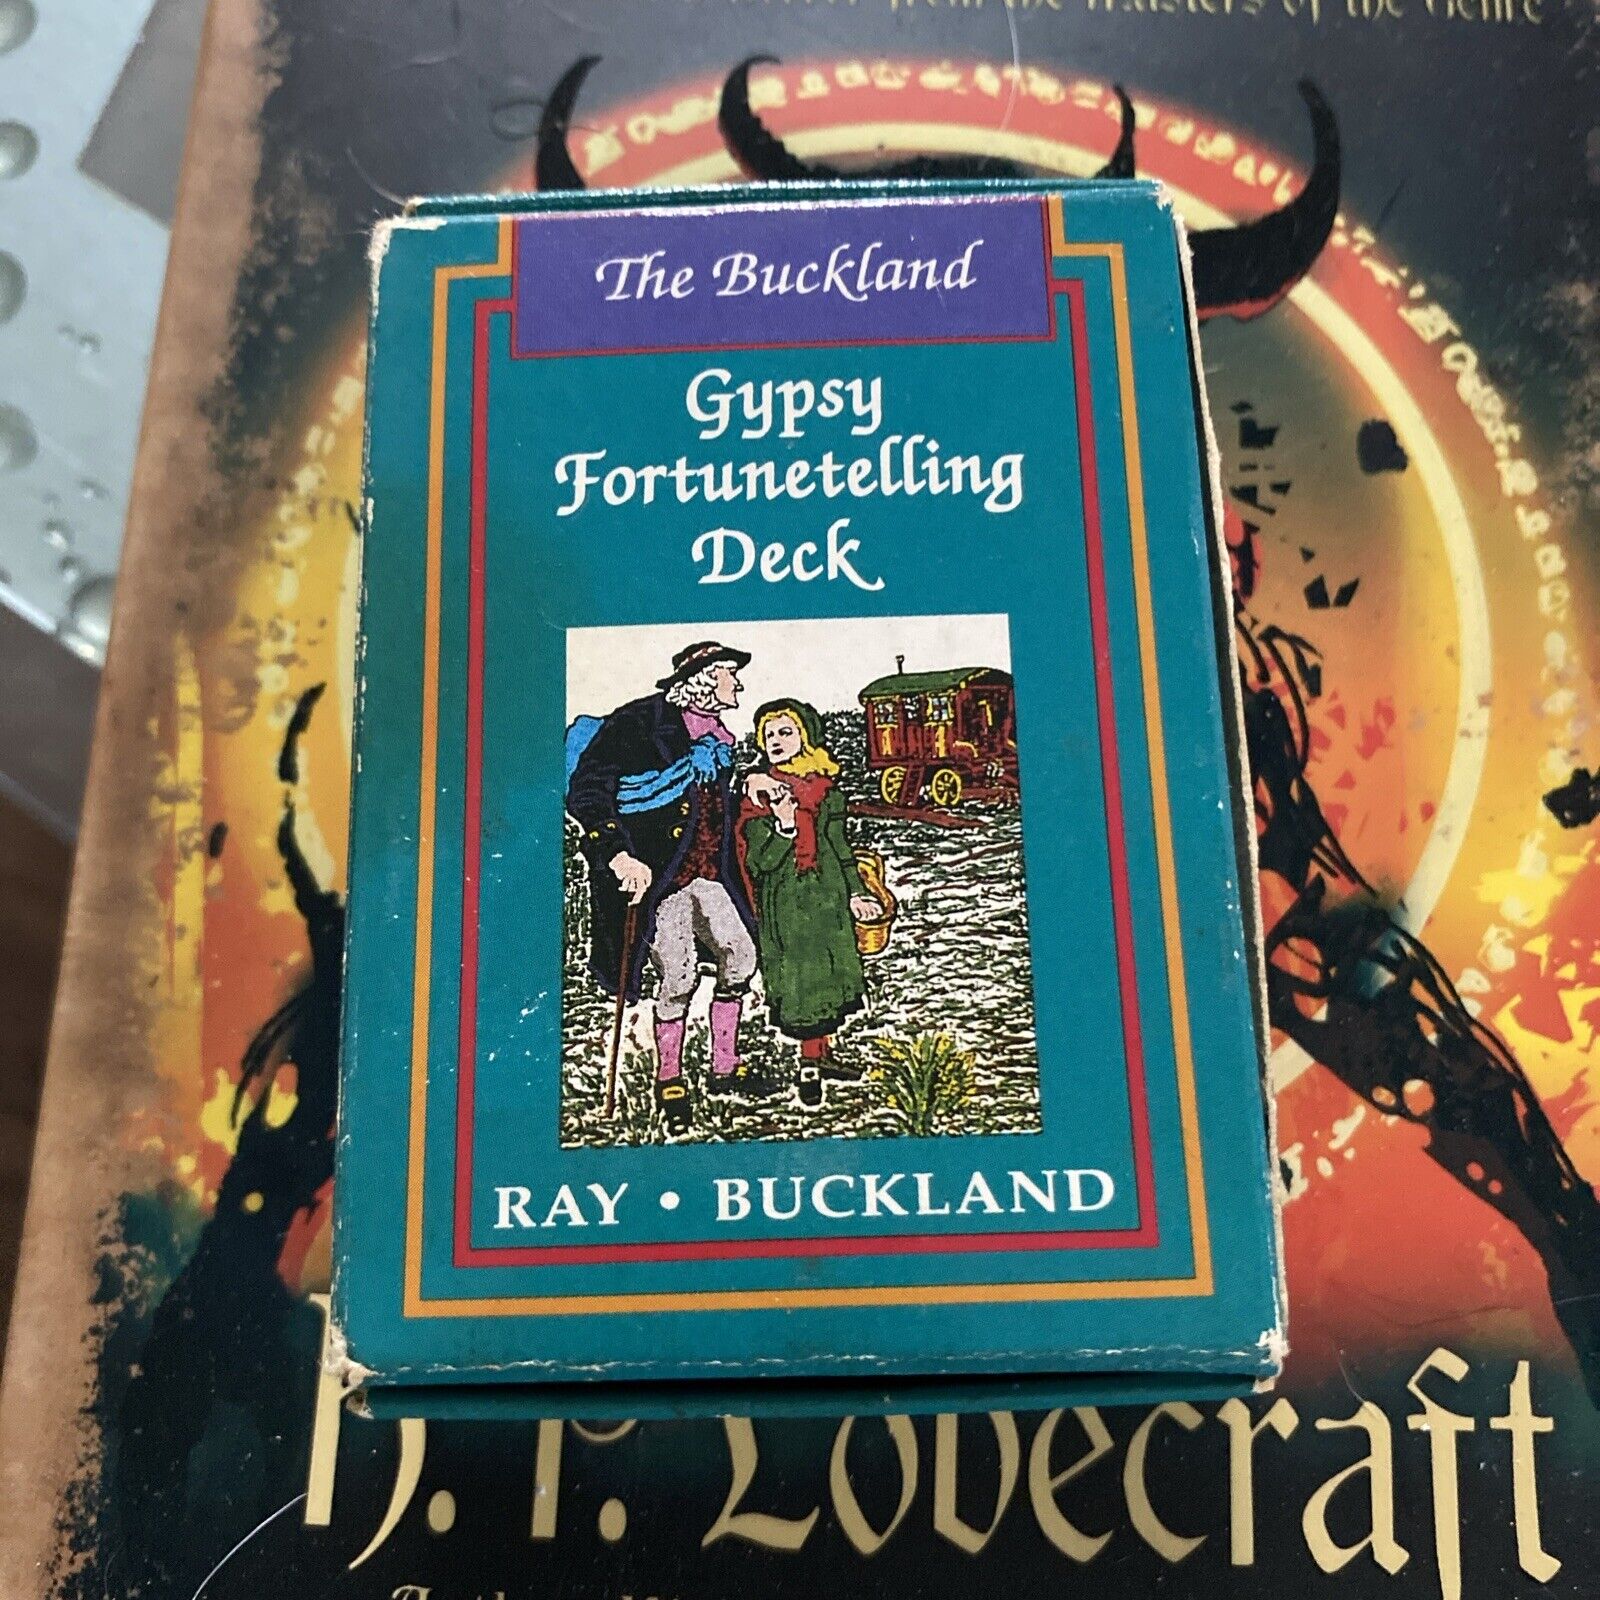 The Buckland Gypsy Fortune Telling Deck by Raymond Buckland (1969, Print, Other)